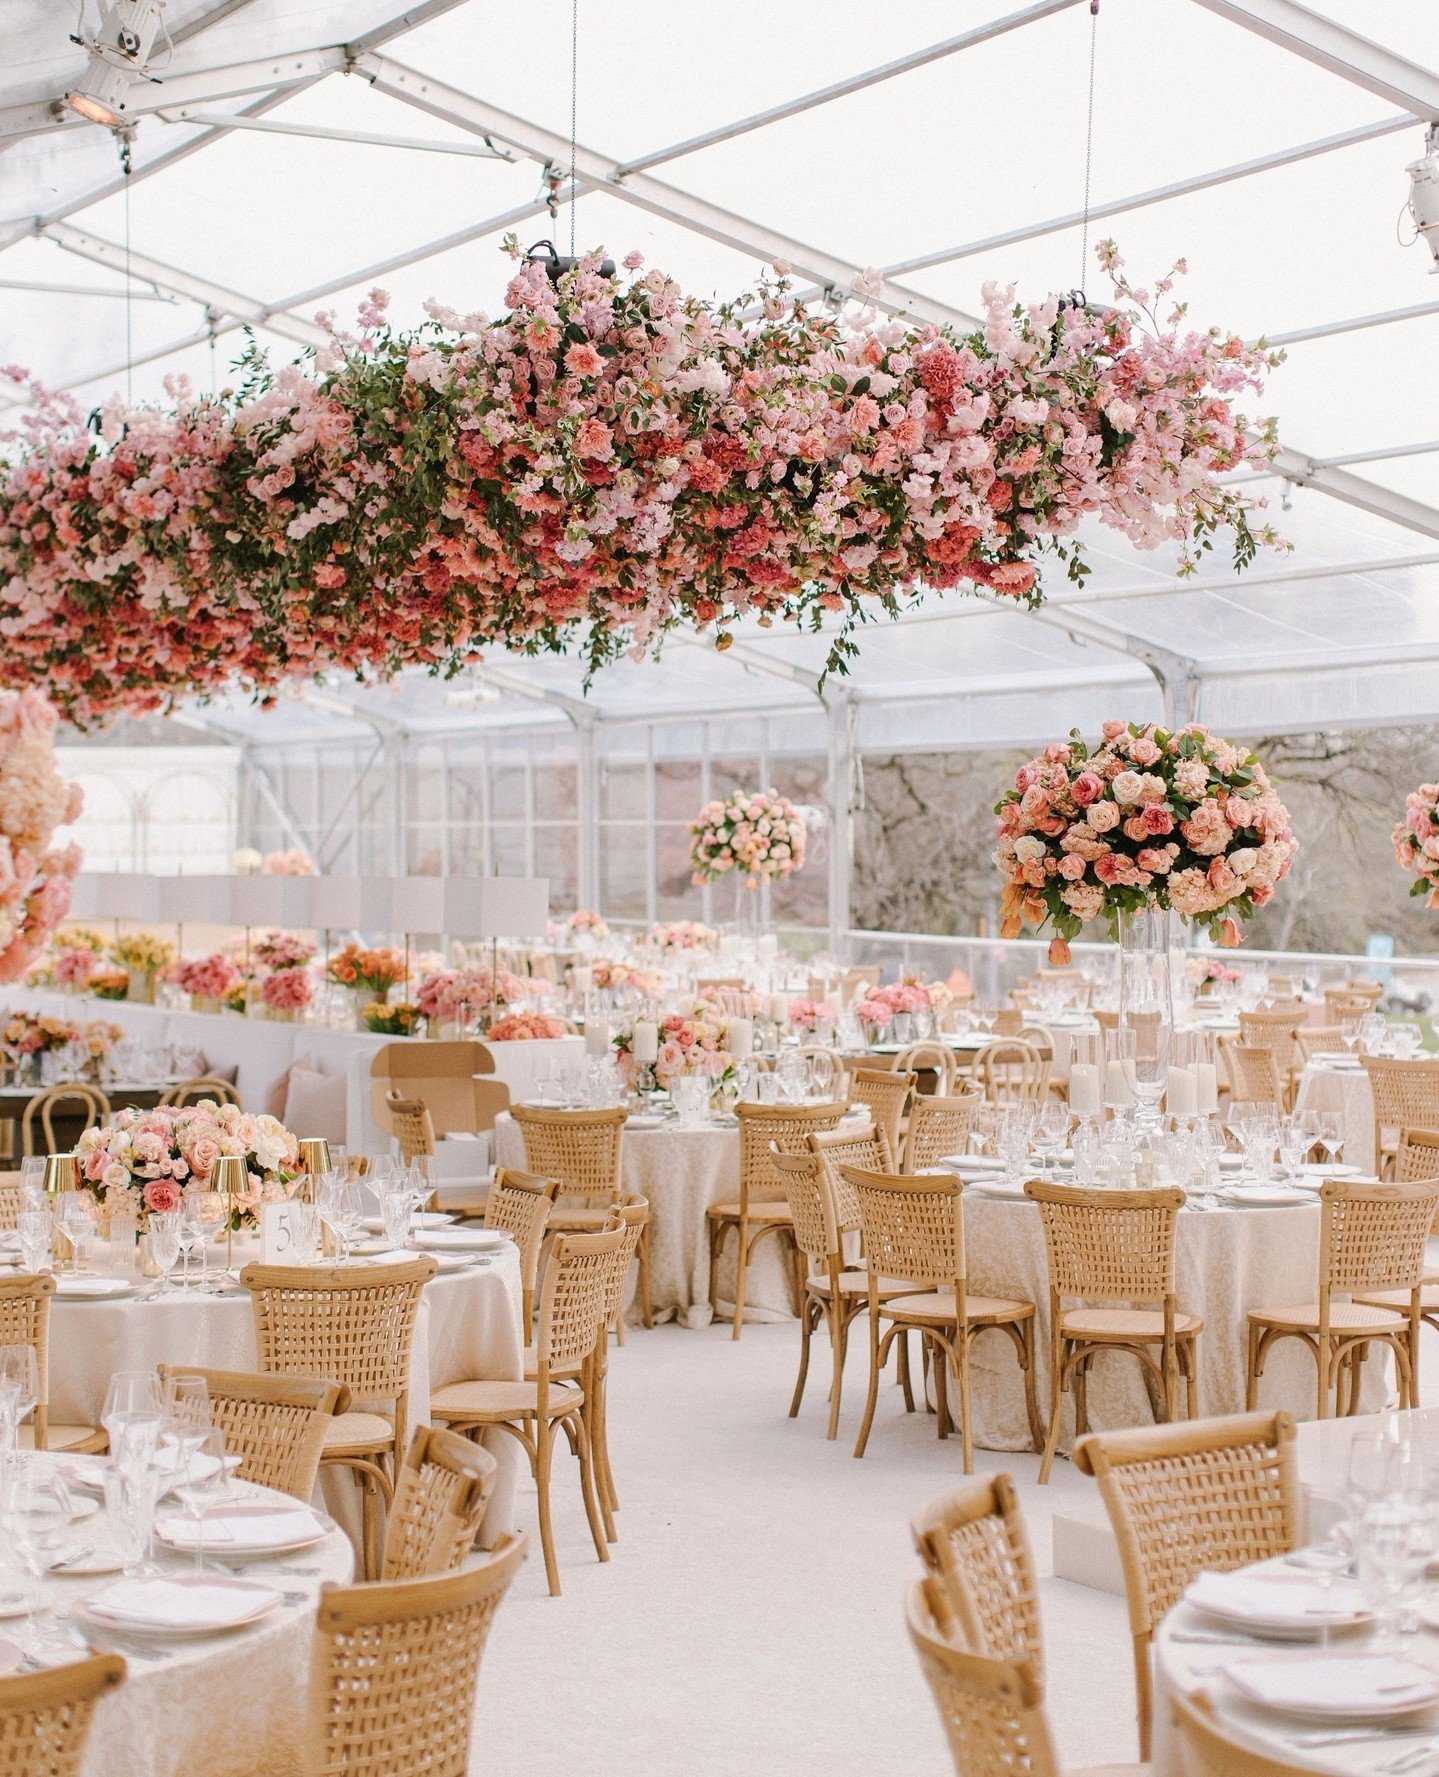 A blush-worthy moment for this magical reception.⁠
⁠
#josephwestphotography⁠
⁠
⁠Planner: @kirstinroseevents​⁠
Video: @grandeast.weddings⁠
Floral: @jacksondurhamevents​⁠
Chair &amp; Tabletop Rentals: @poshcouturerentals​⁠
Lighting: @stage2lighting​⁠
C